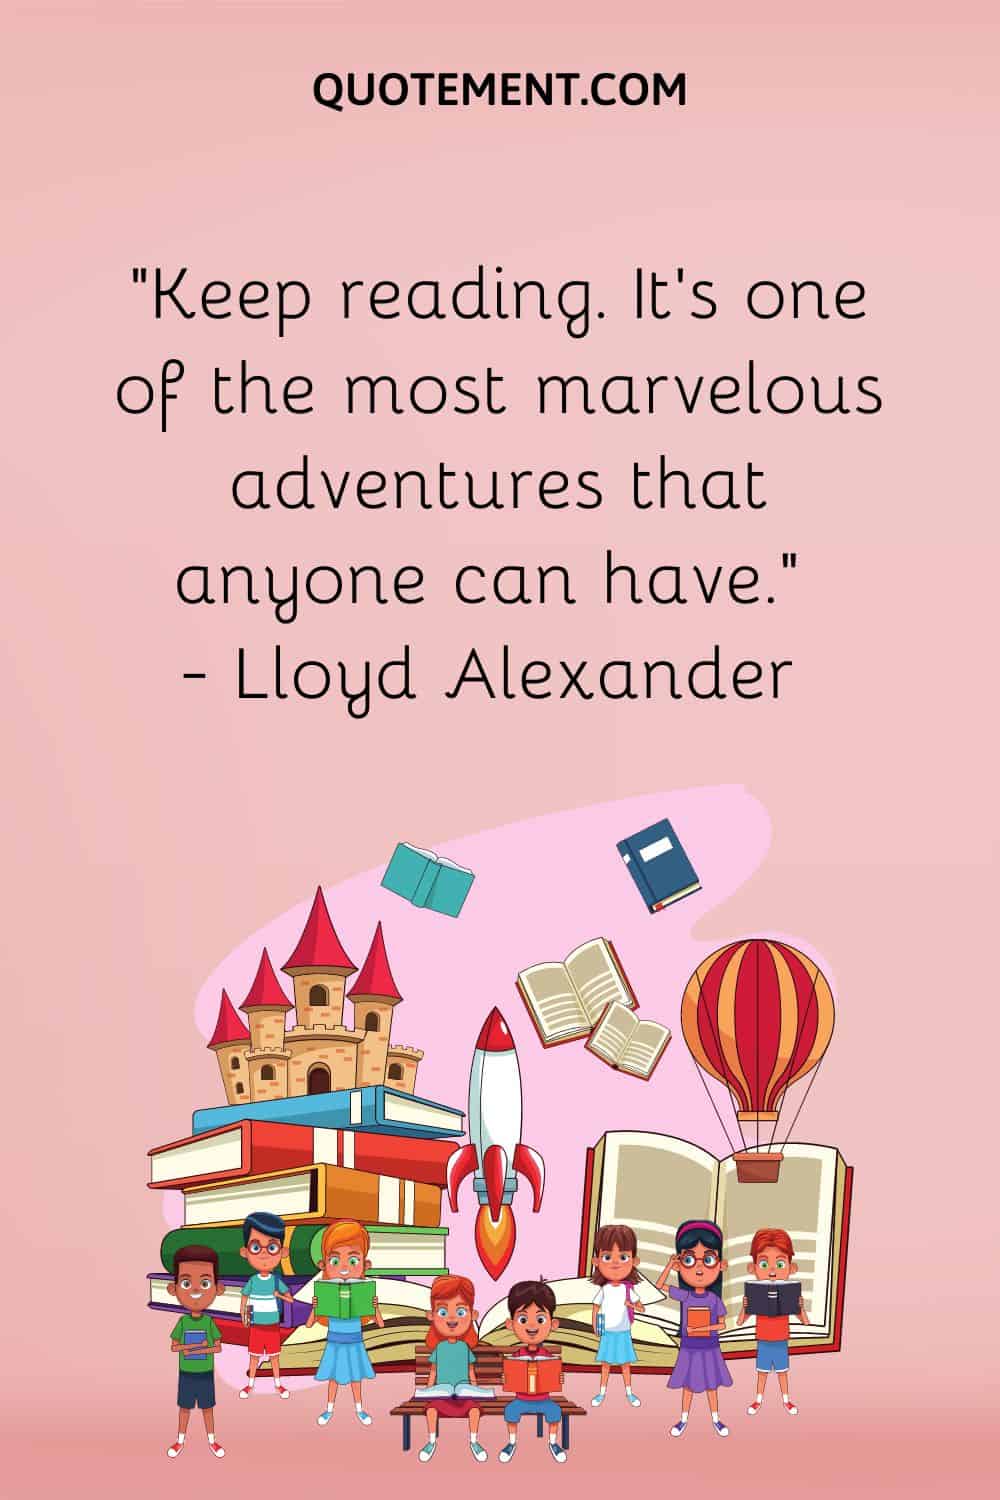 “Keep reading. It’s one of the most marvelous adventures that anyone can have.” — Lloyd Alexander